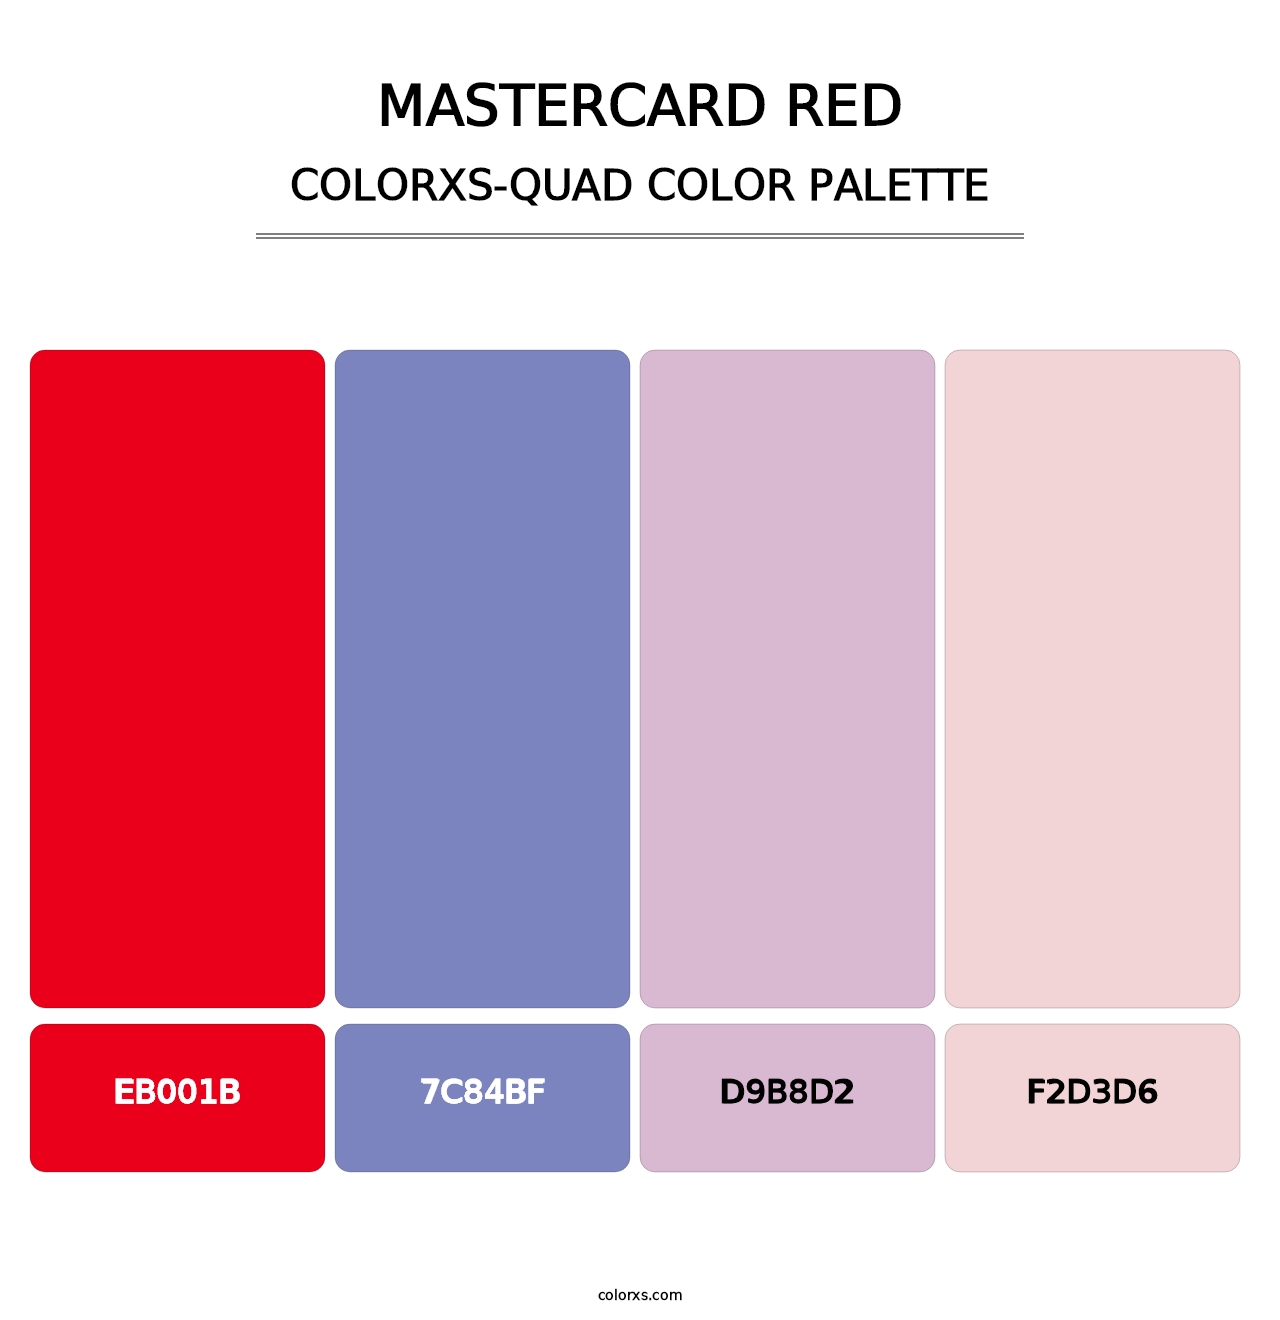 Mastercard Red - Colorxs Quad Palette